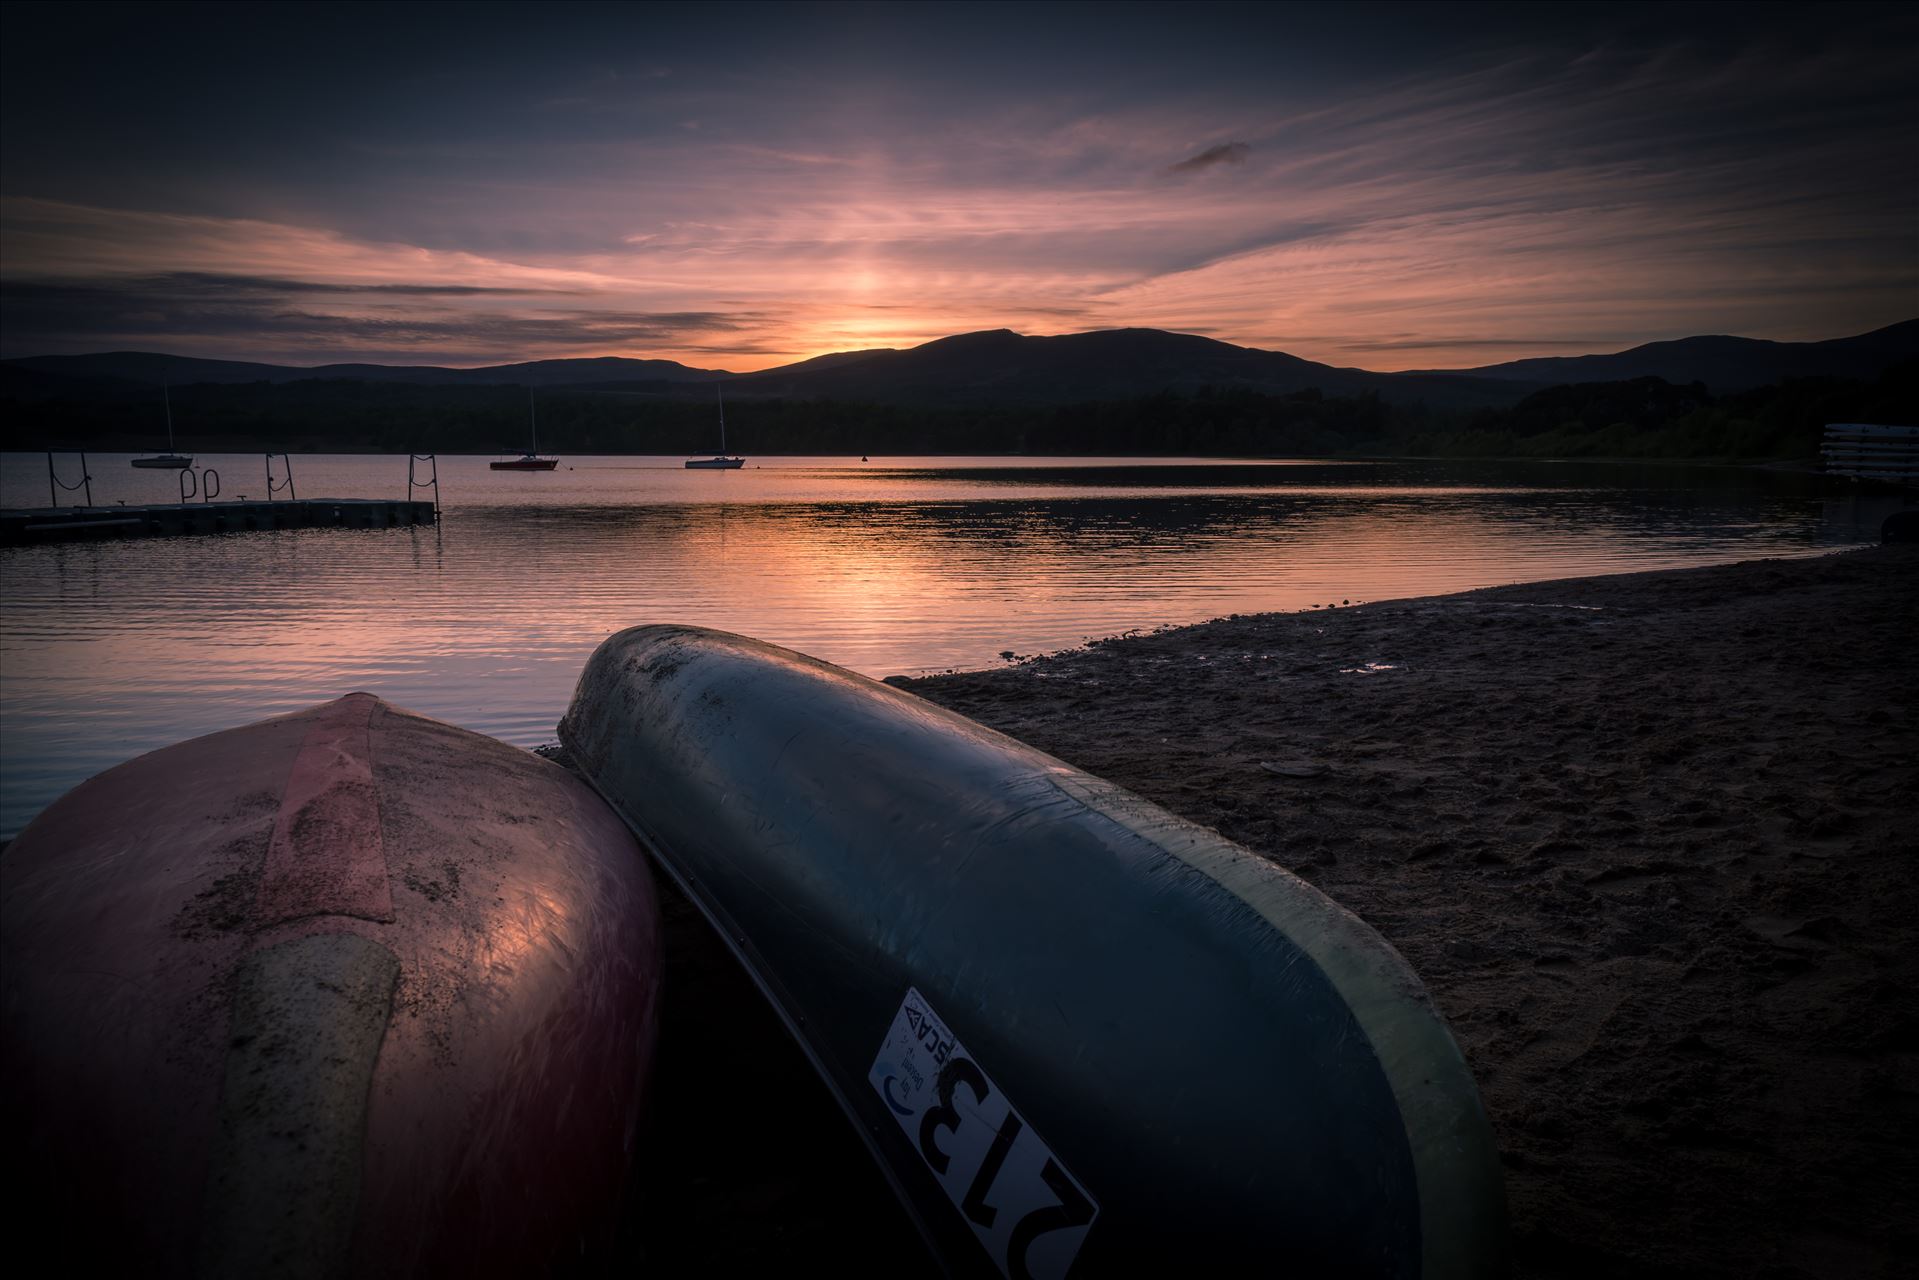 Sunset at Loch Insh, nr Aviemore -  by philreay